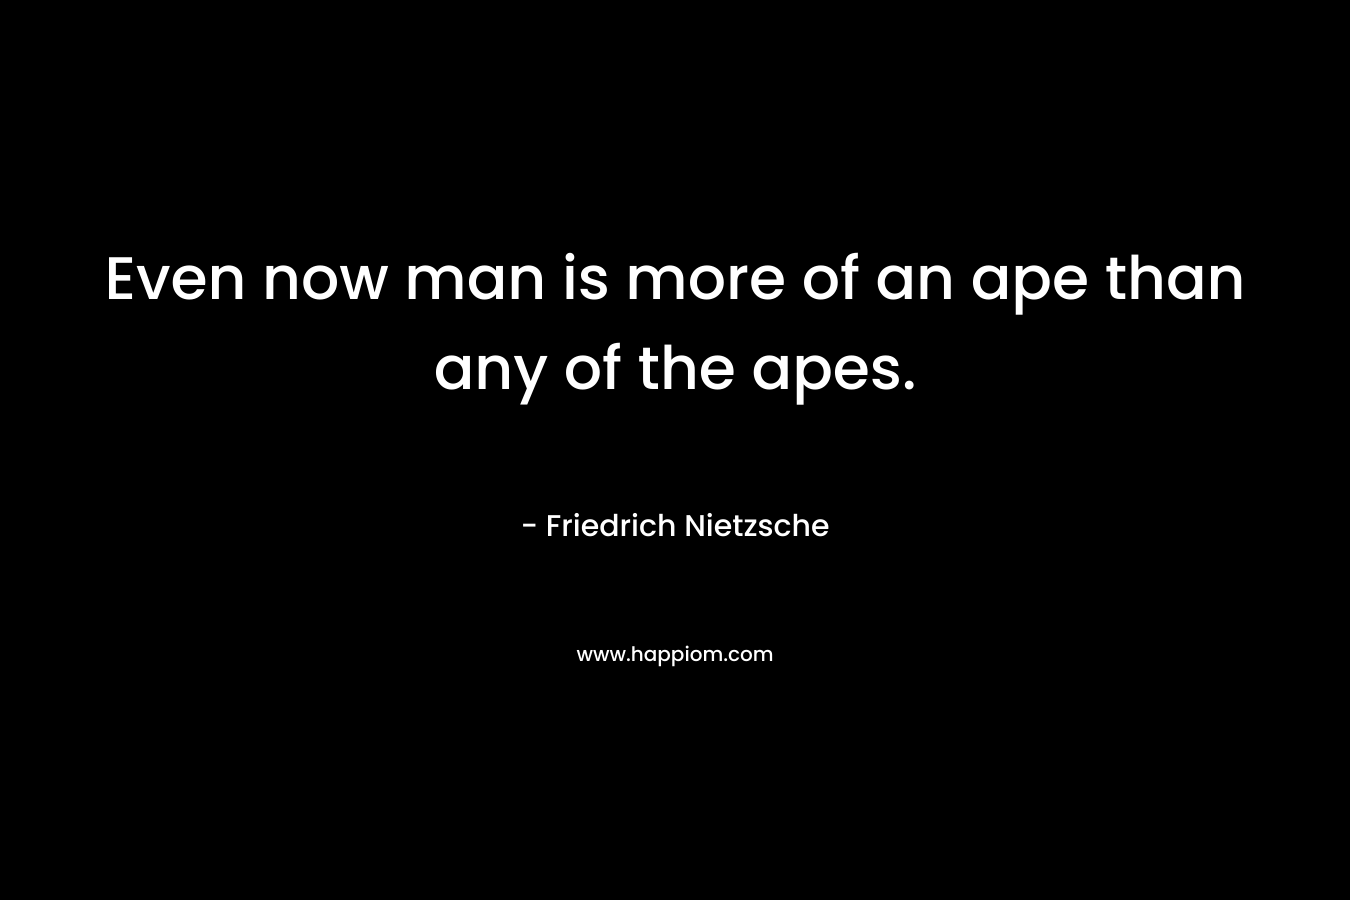 Even now man is more of an ape than any of the apes. – Friedrich Nietzsche